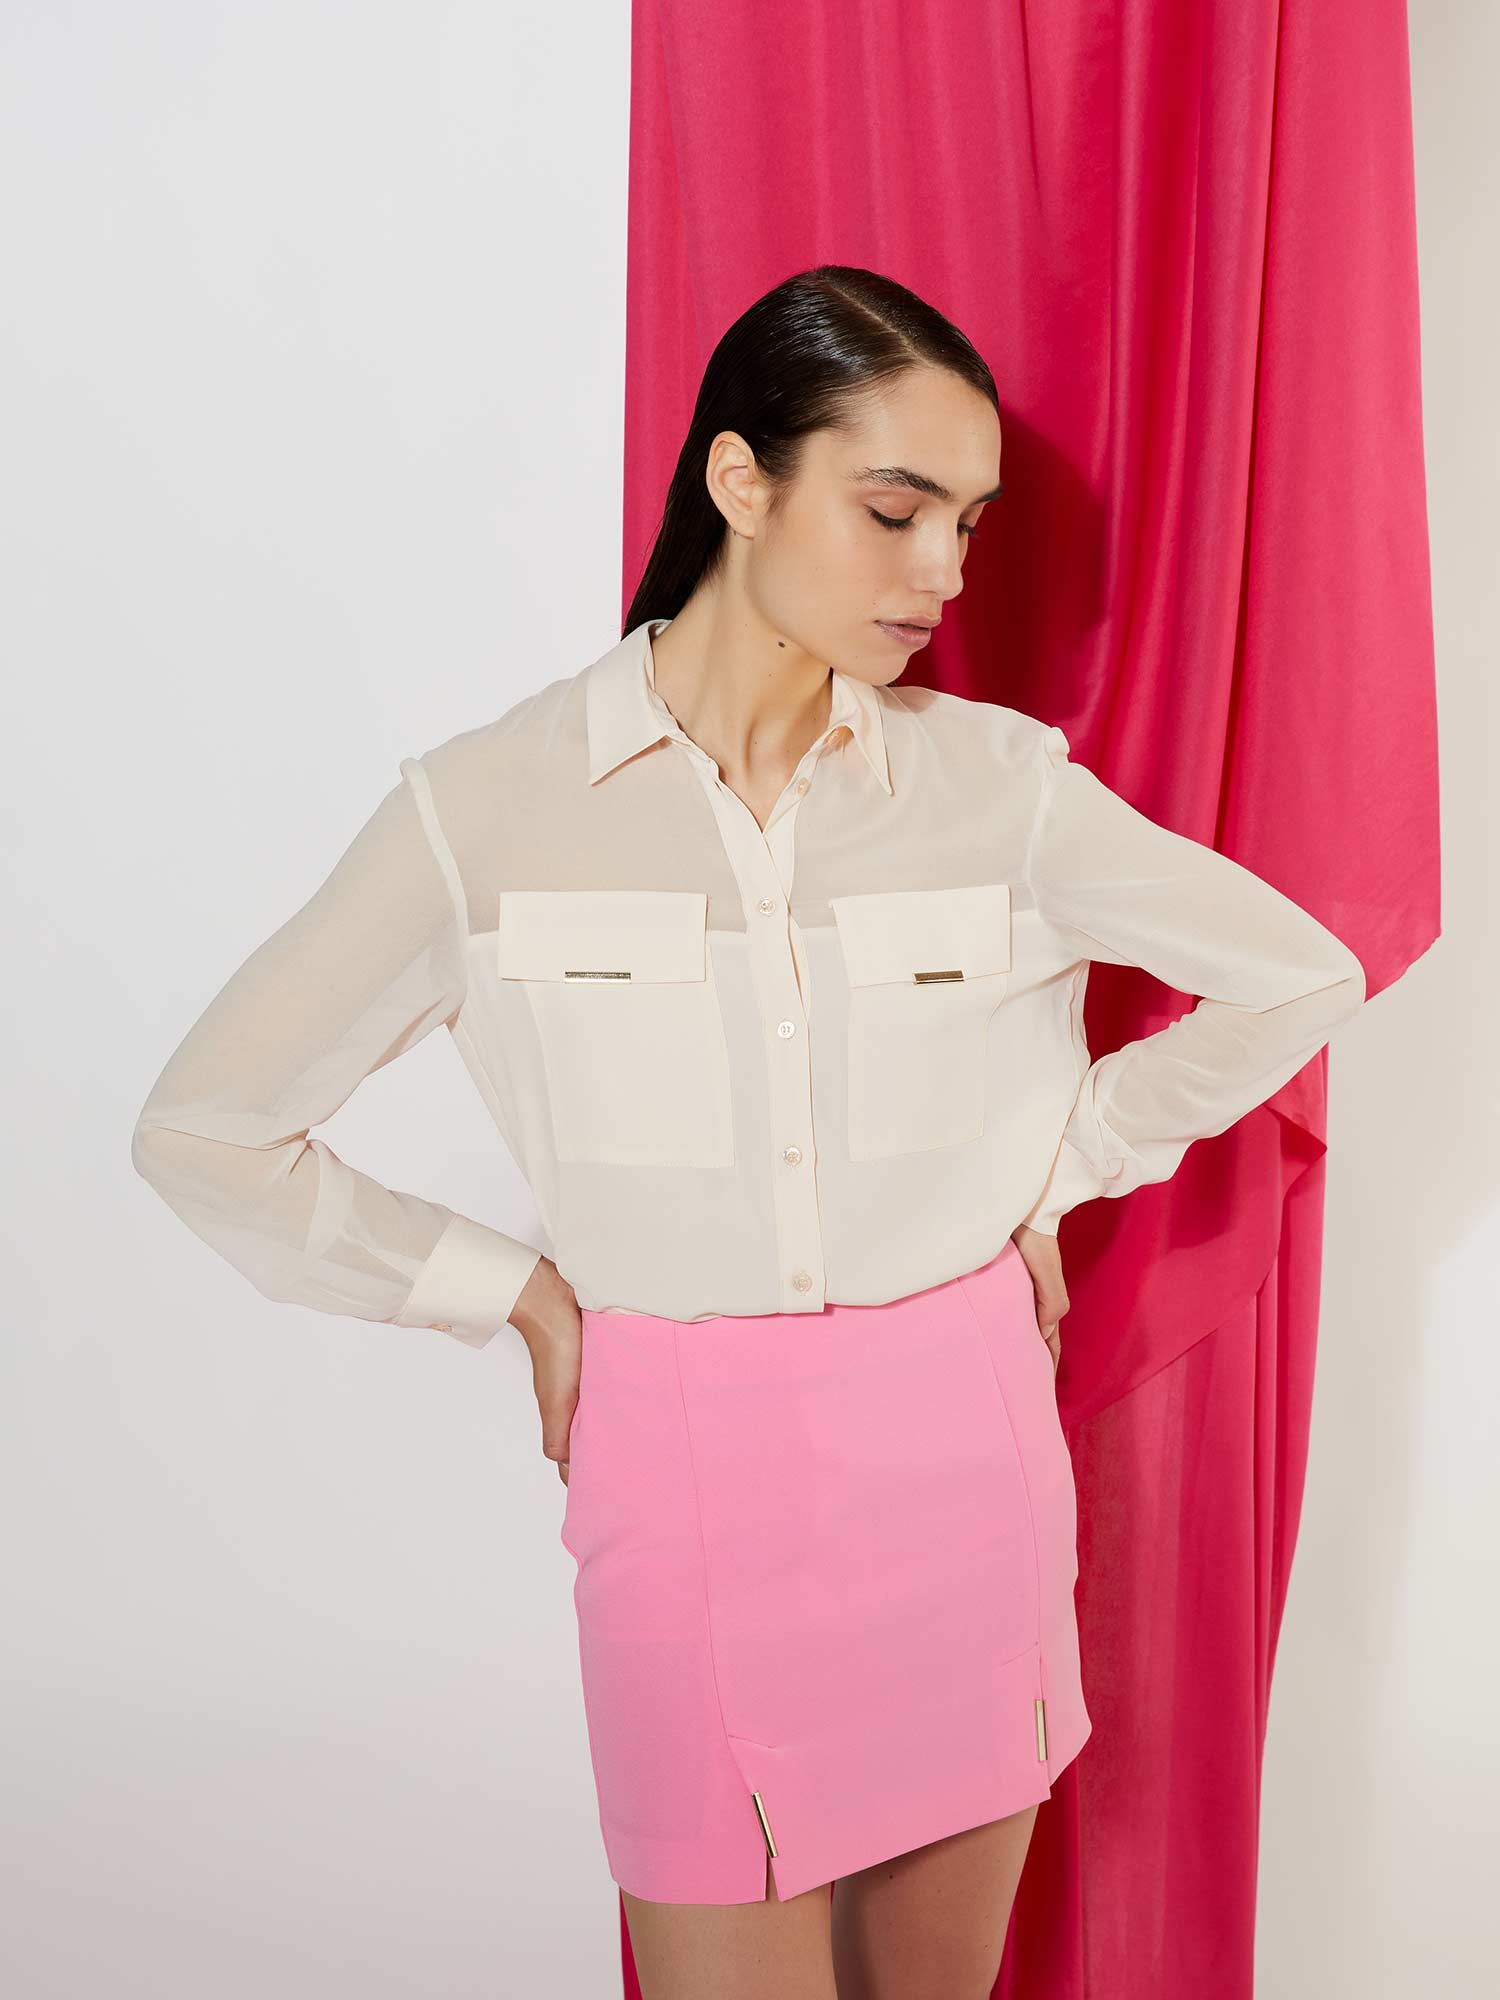 Silk acetate and georgette see-through shirt